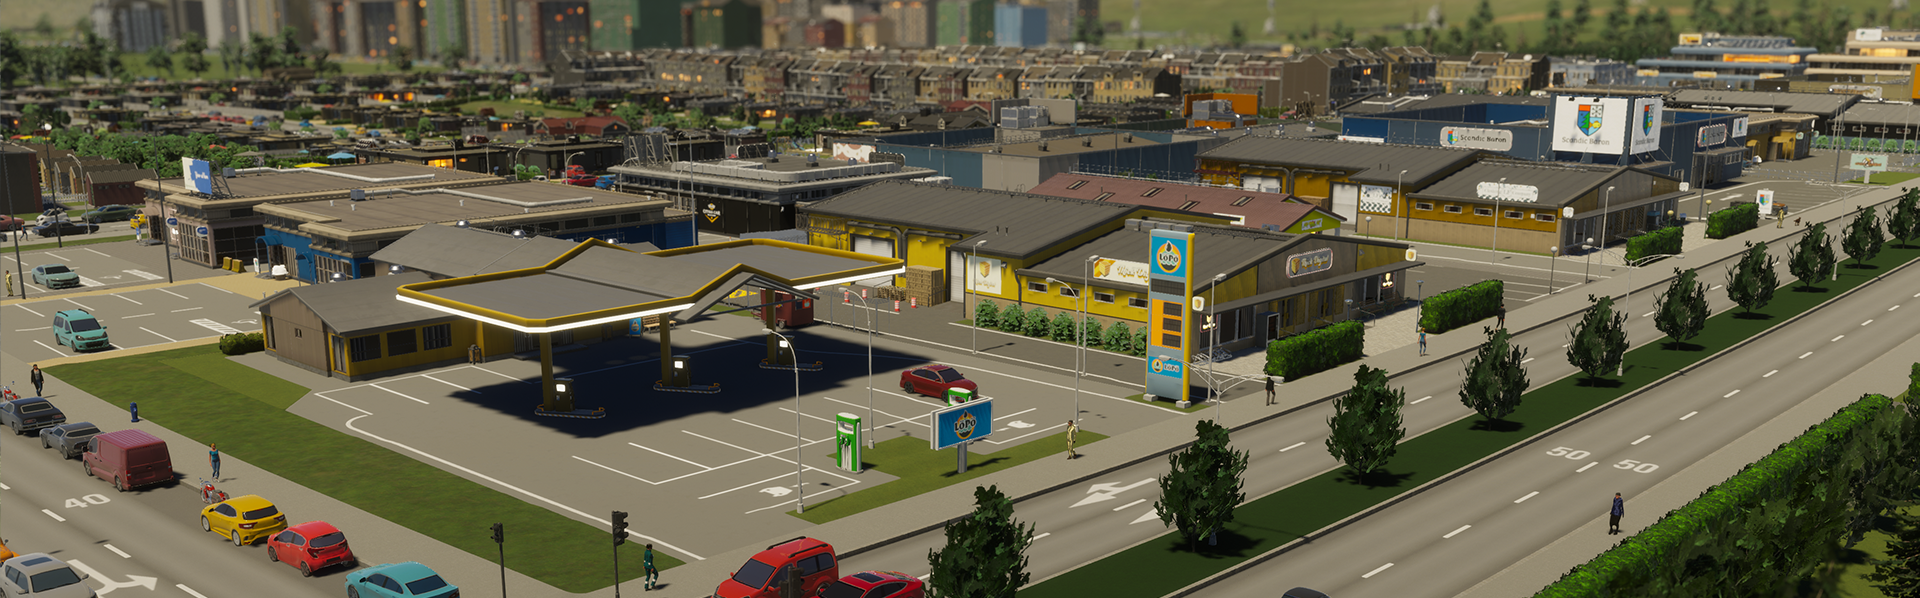 Cities: Skylines 2's new zoning options, Signature Buildings, and more  revealed - Neowin